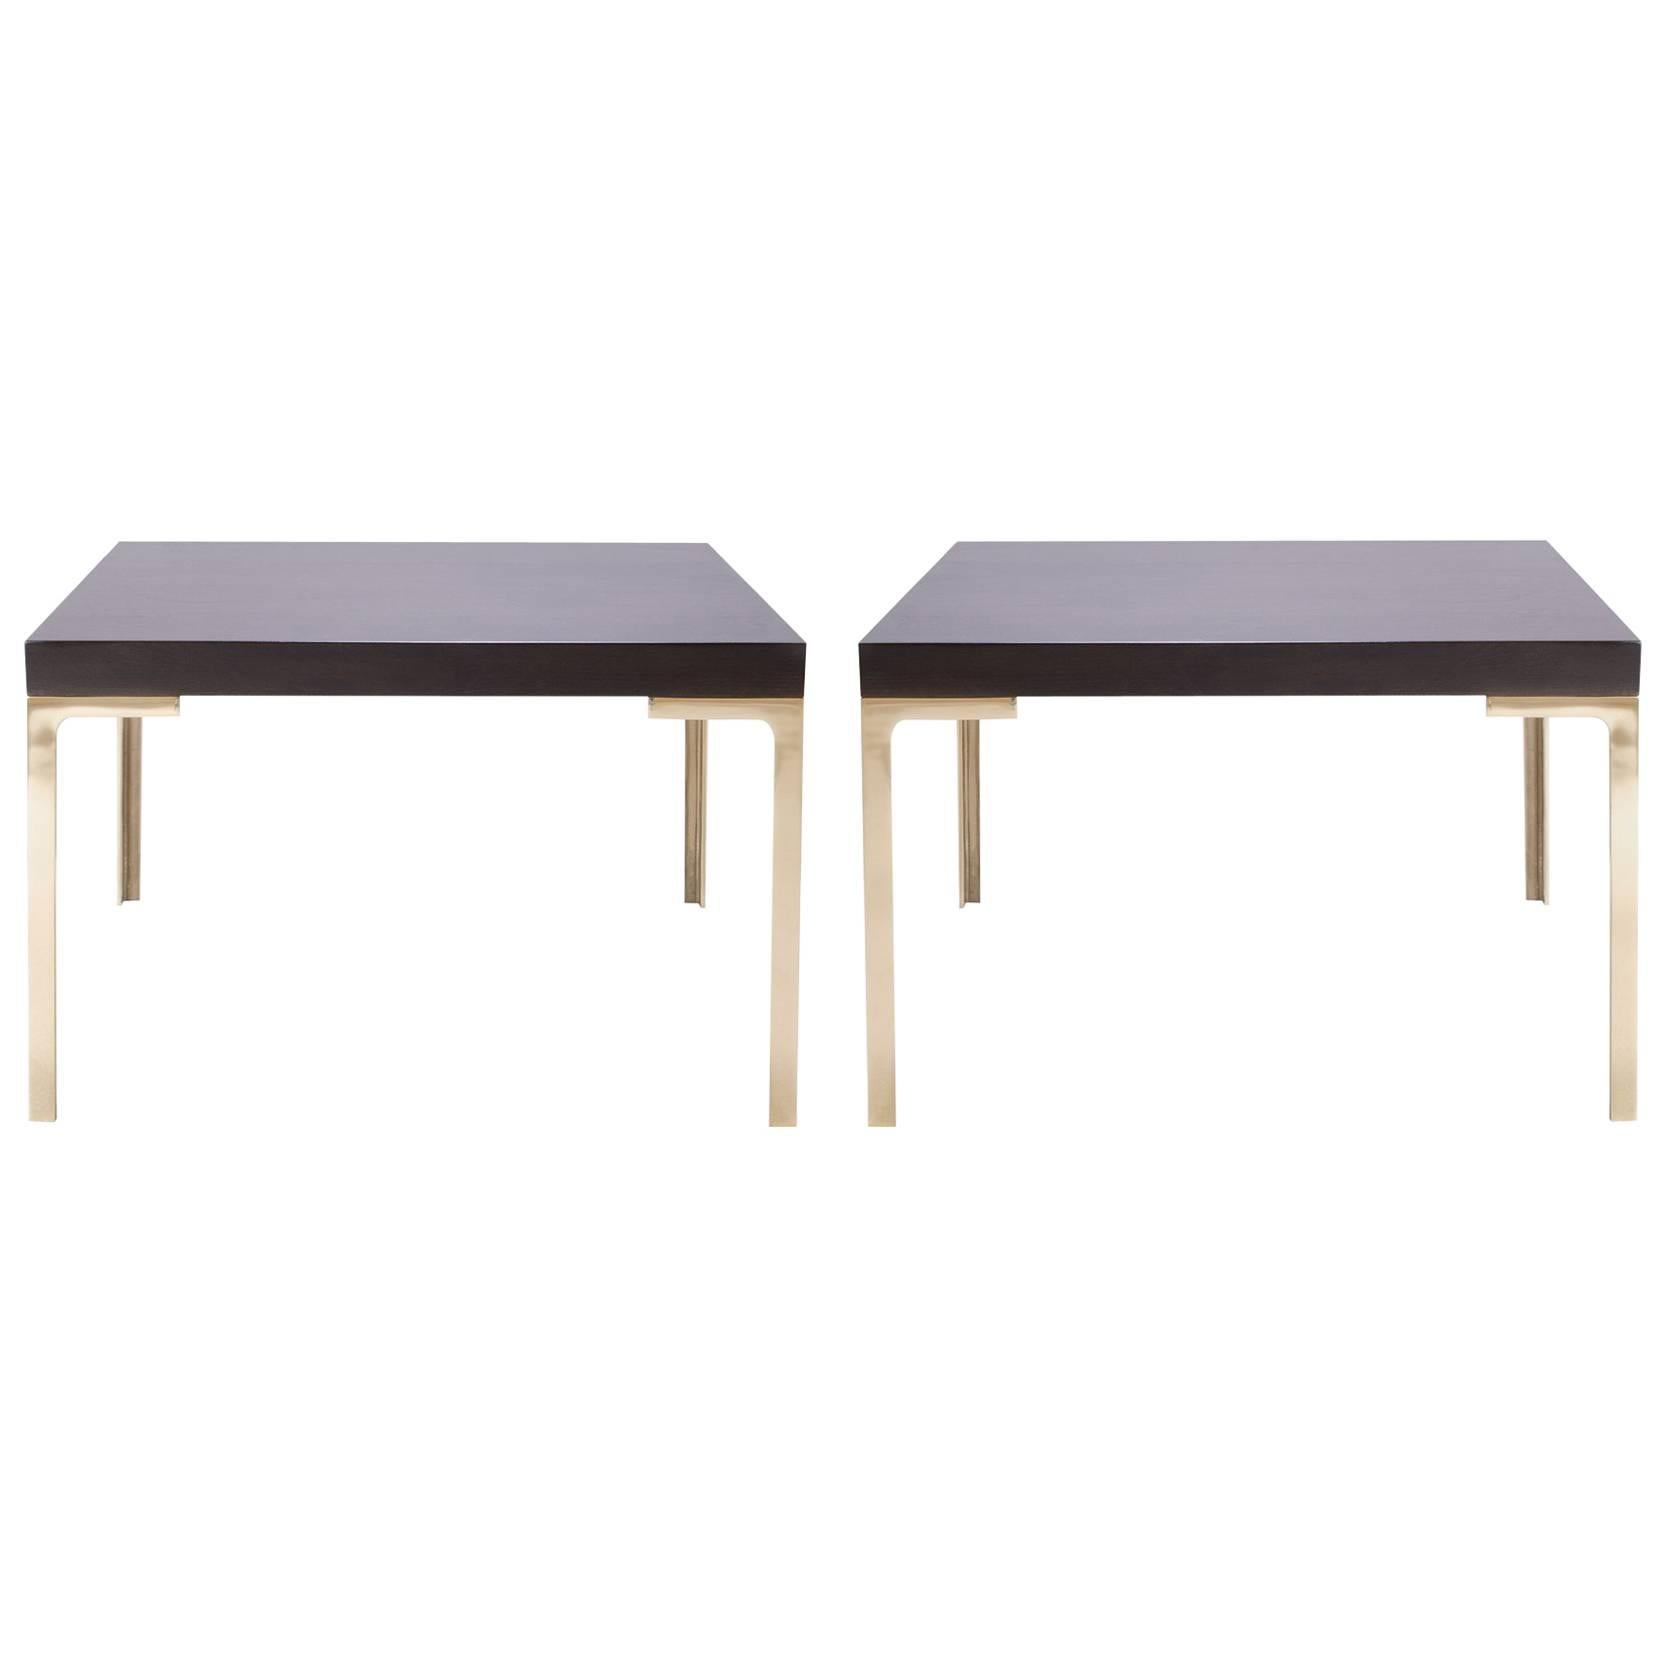 Astor Brass Occasional Tables in Walnut by Montage, Pair